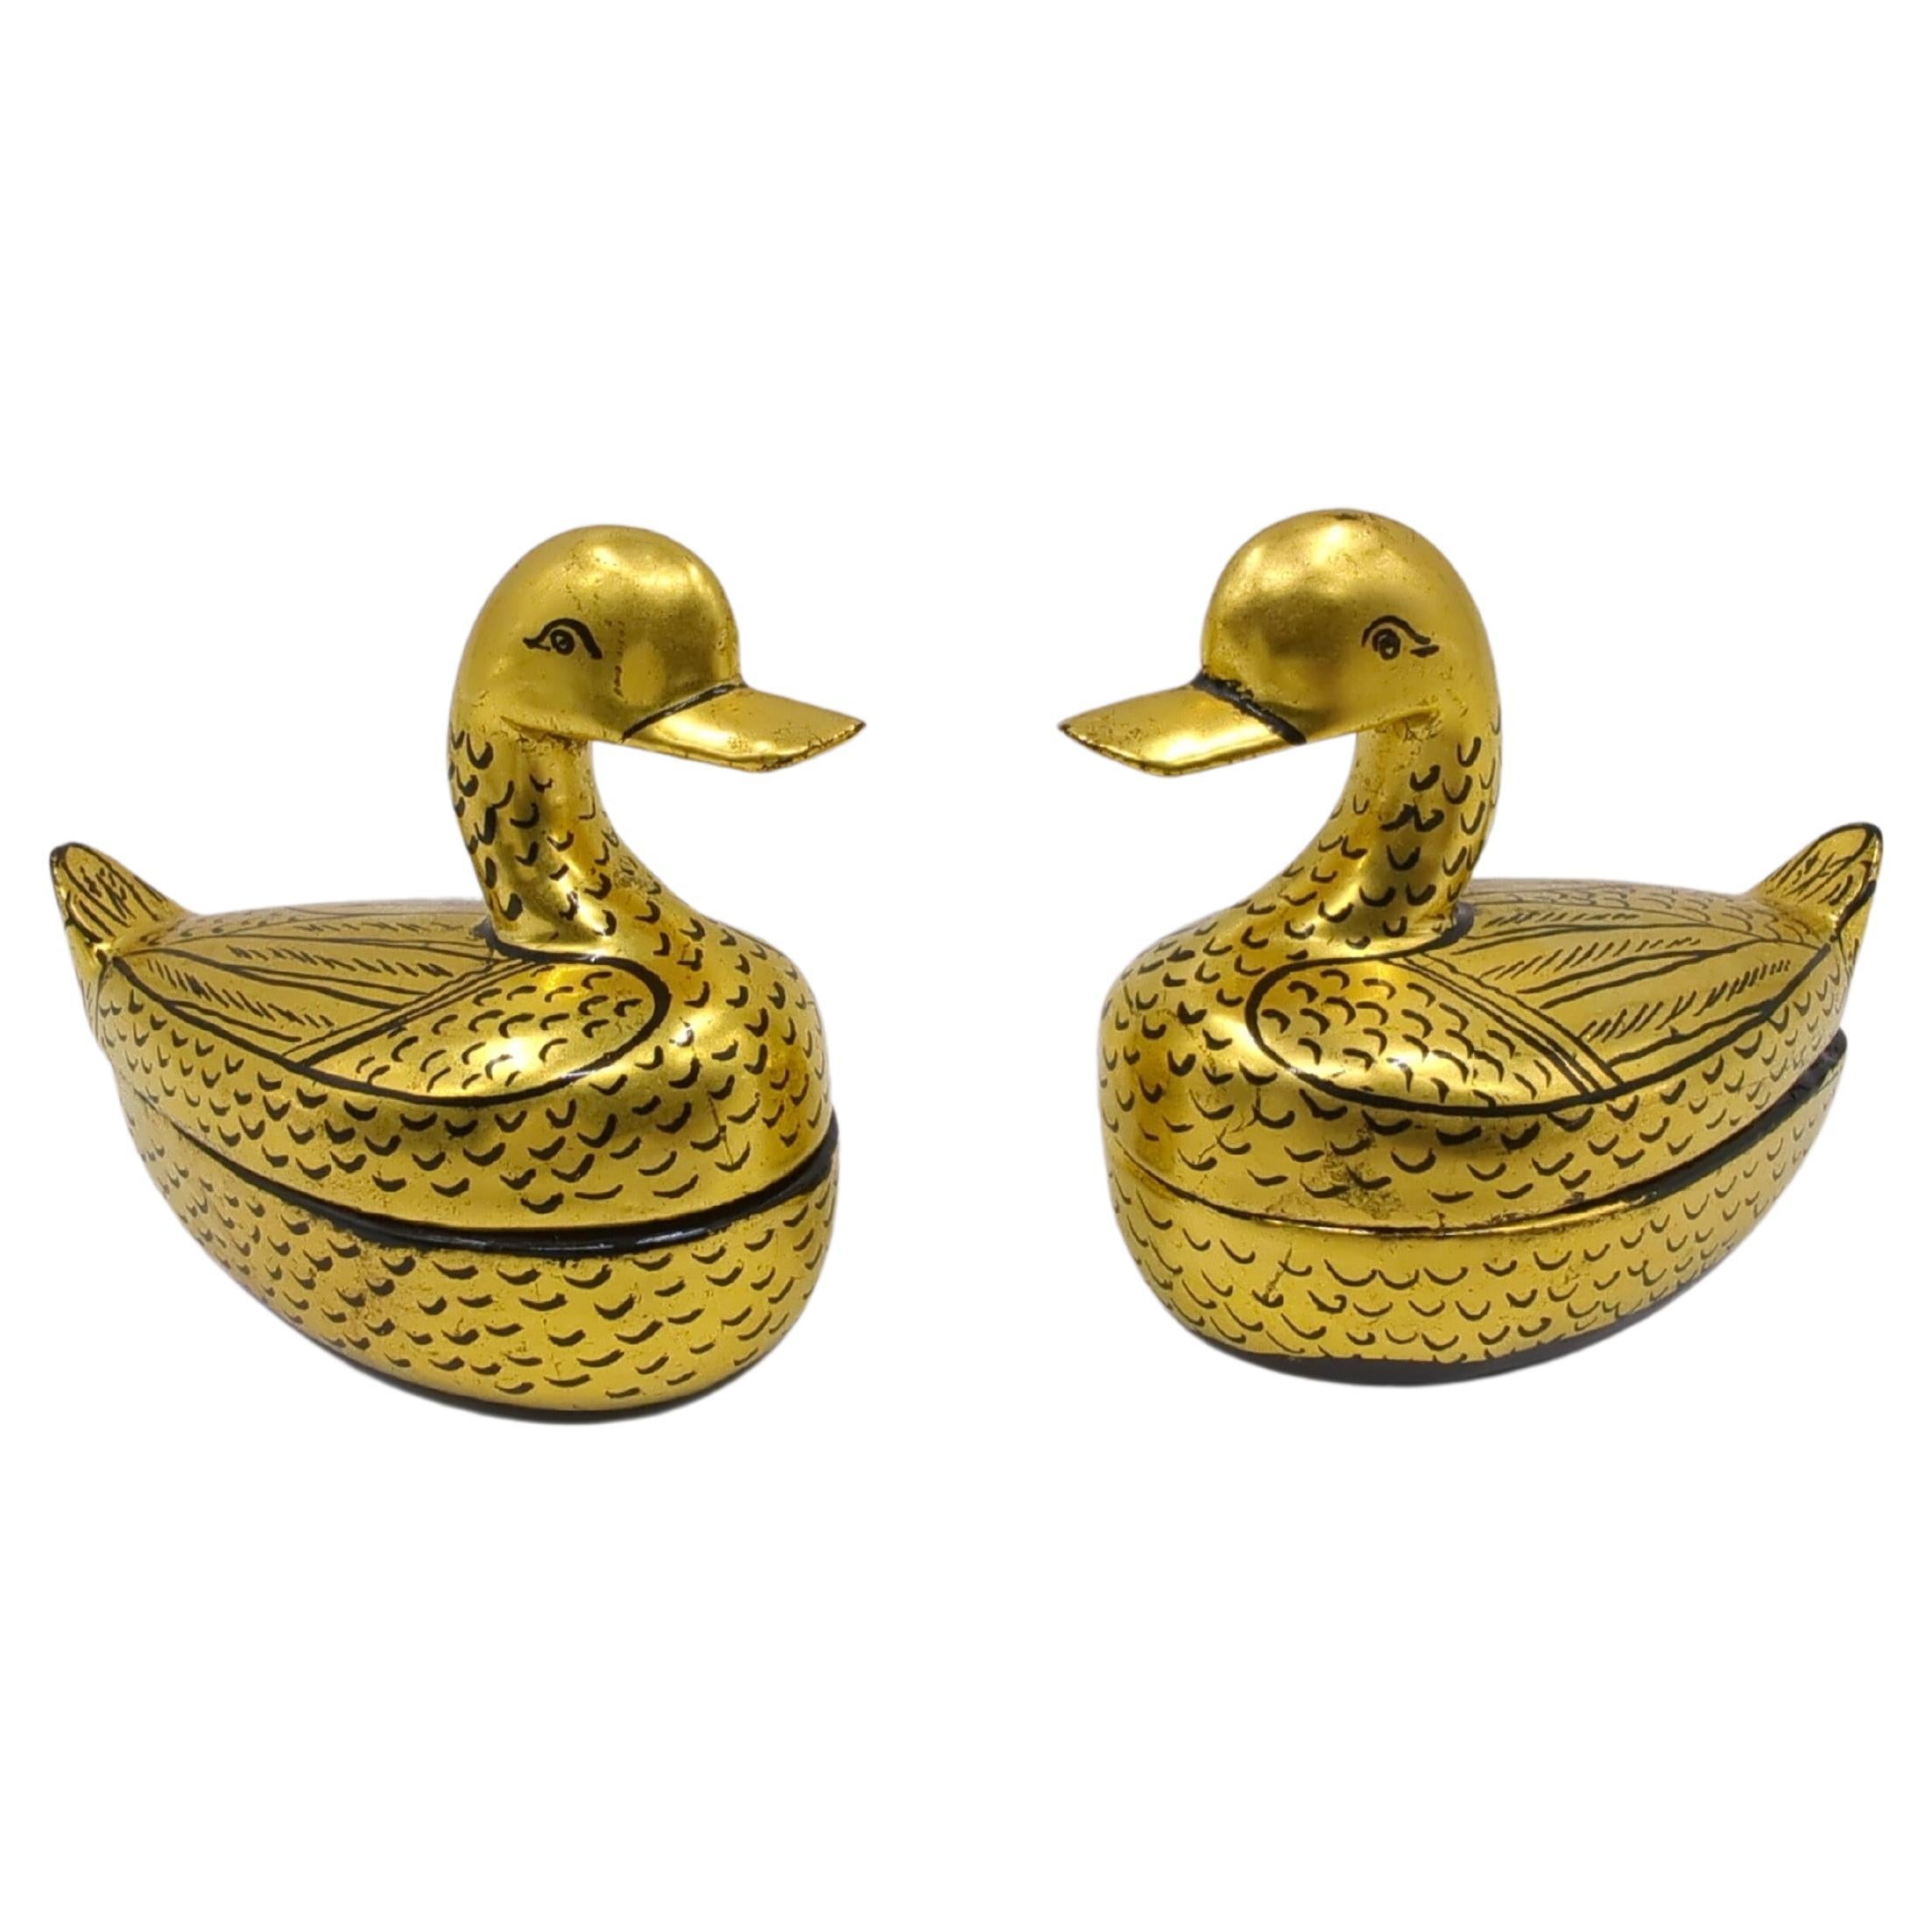 A wonderful pair of mid century Chinese lacquer covered box in the form of Mandarin ducks, hand decorated with black details on gilt gold ground.

This pair of golden covered boxes are truly lovely objects to house your little treasures like those